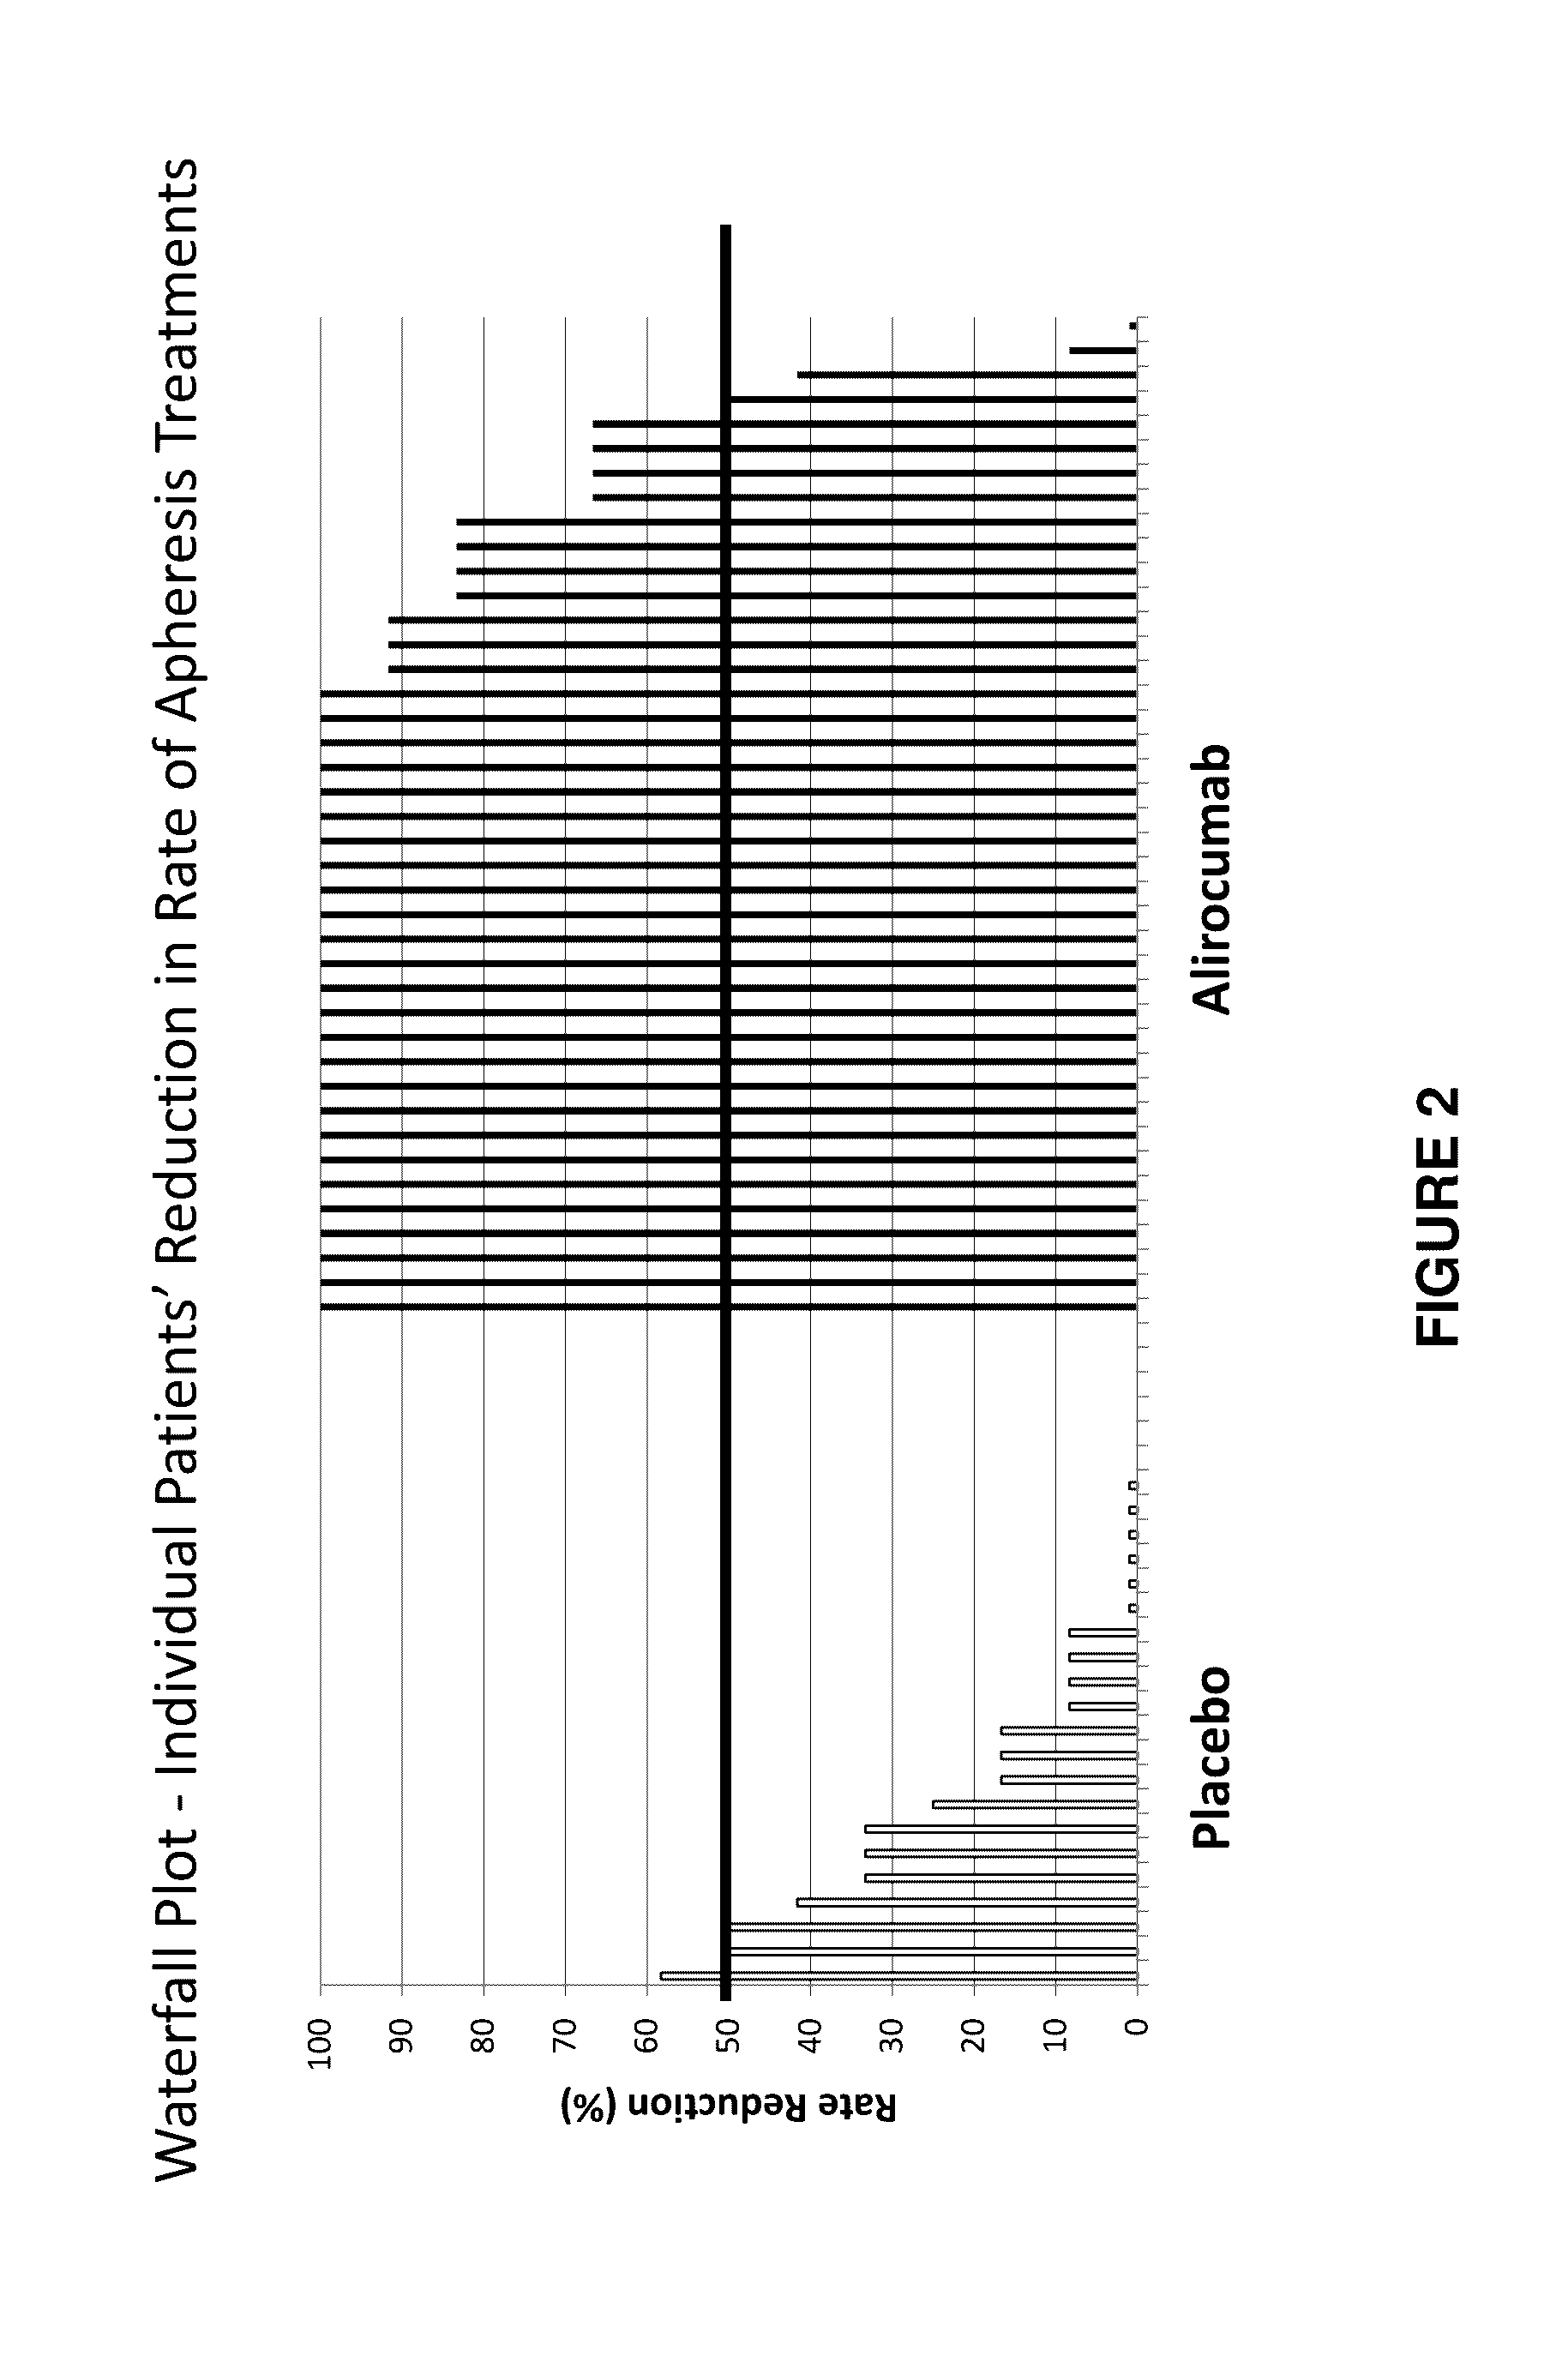 Methods for reducing or eliminating the need for lipoprotein apheresis in patients with hyperlipidemia by administering a pcsk9 inhibitor